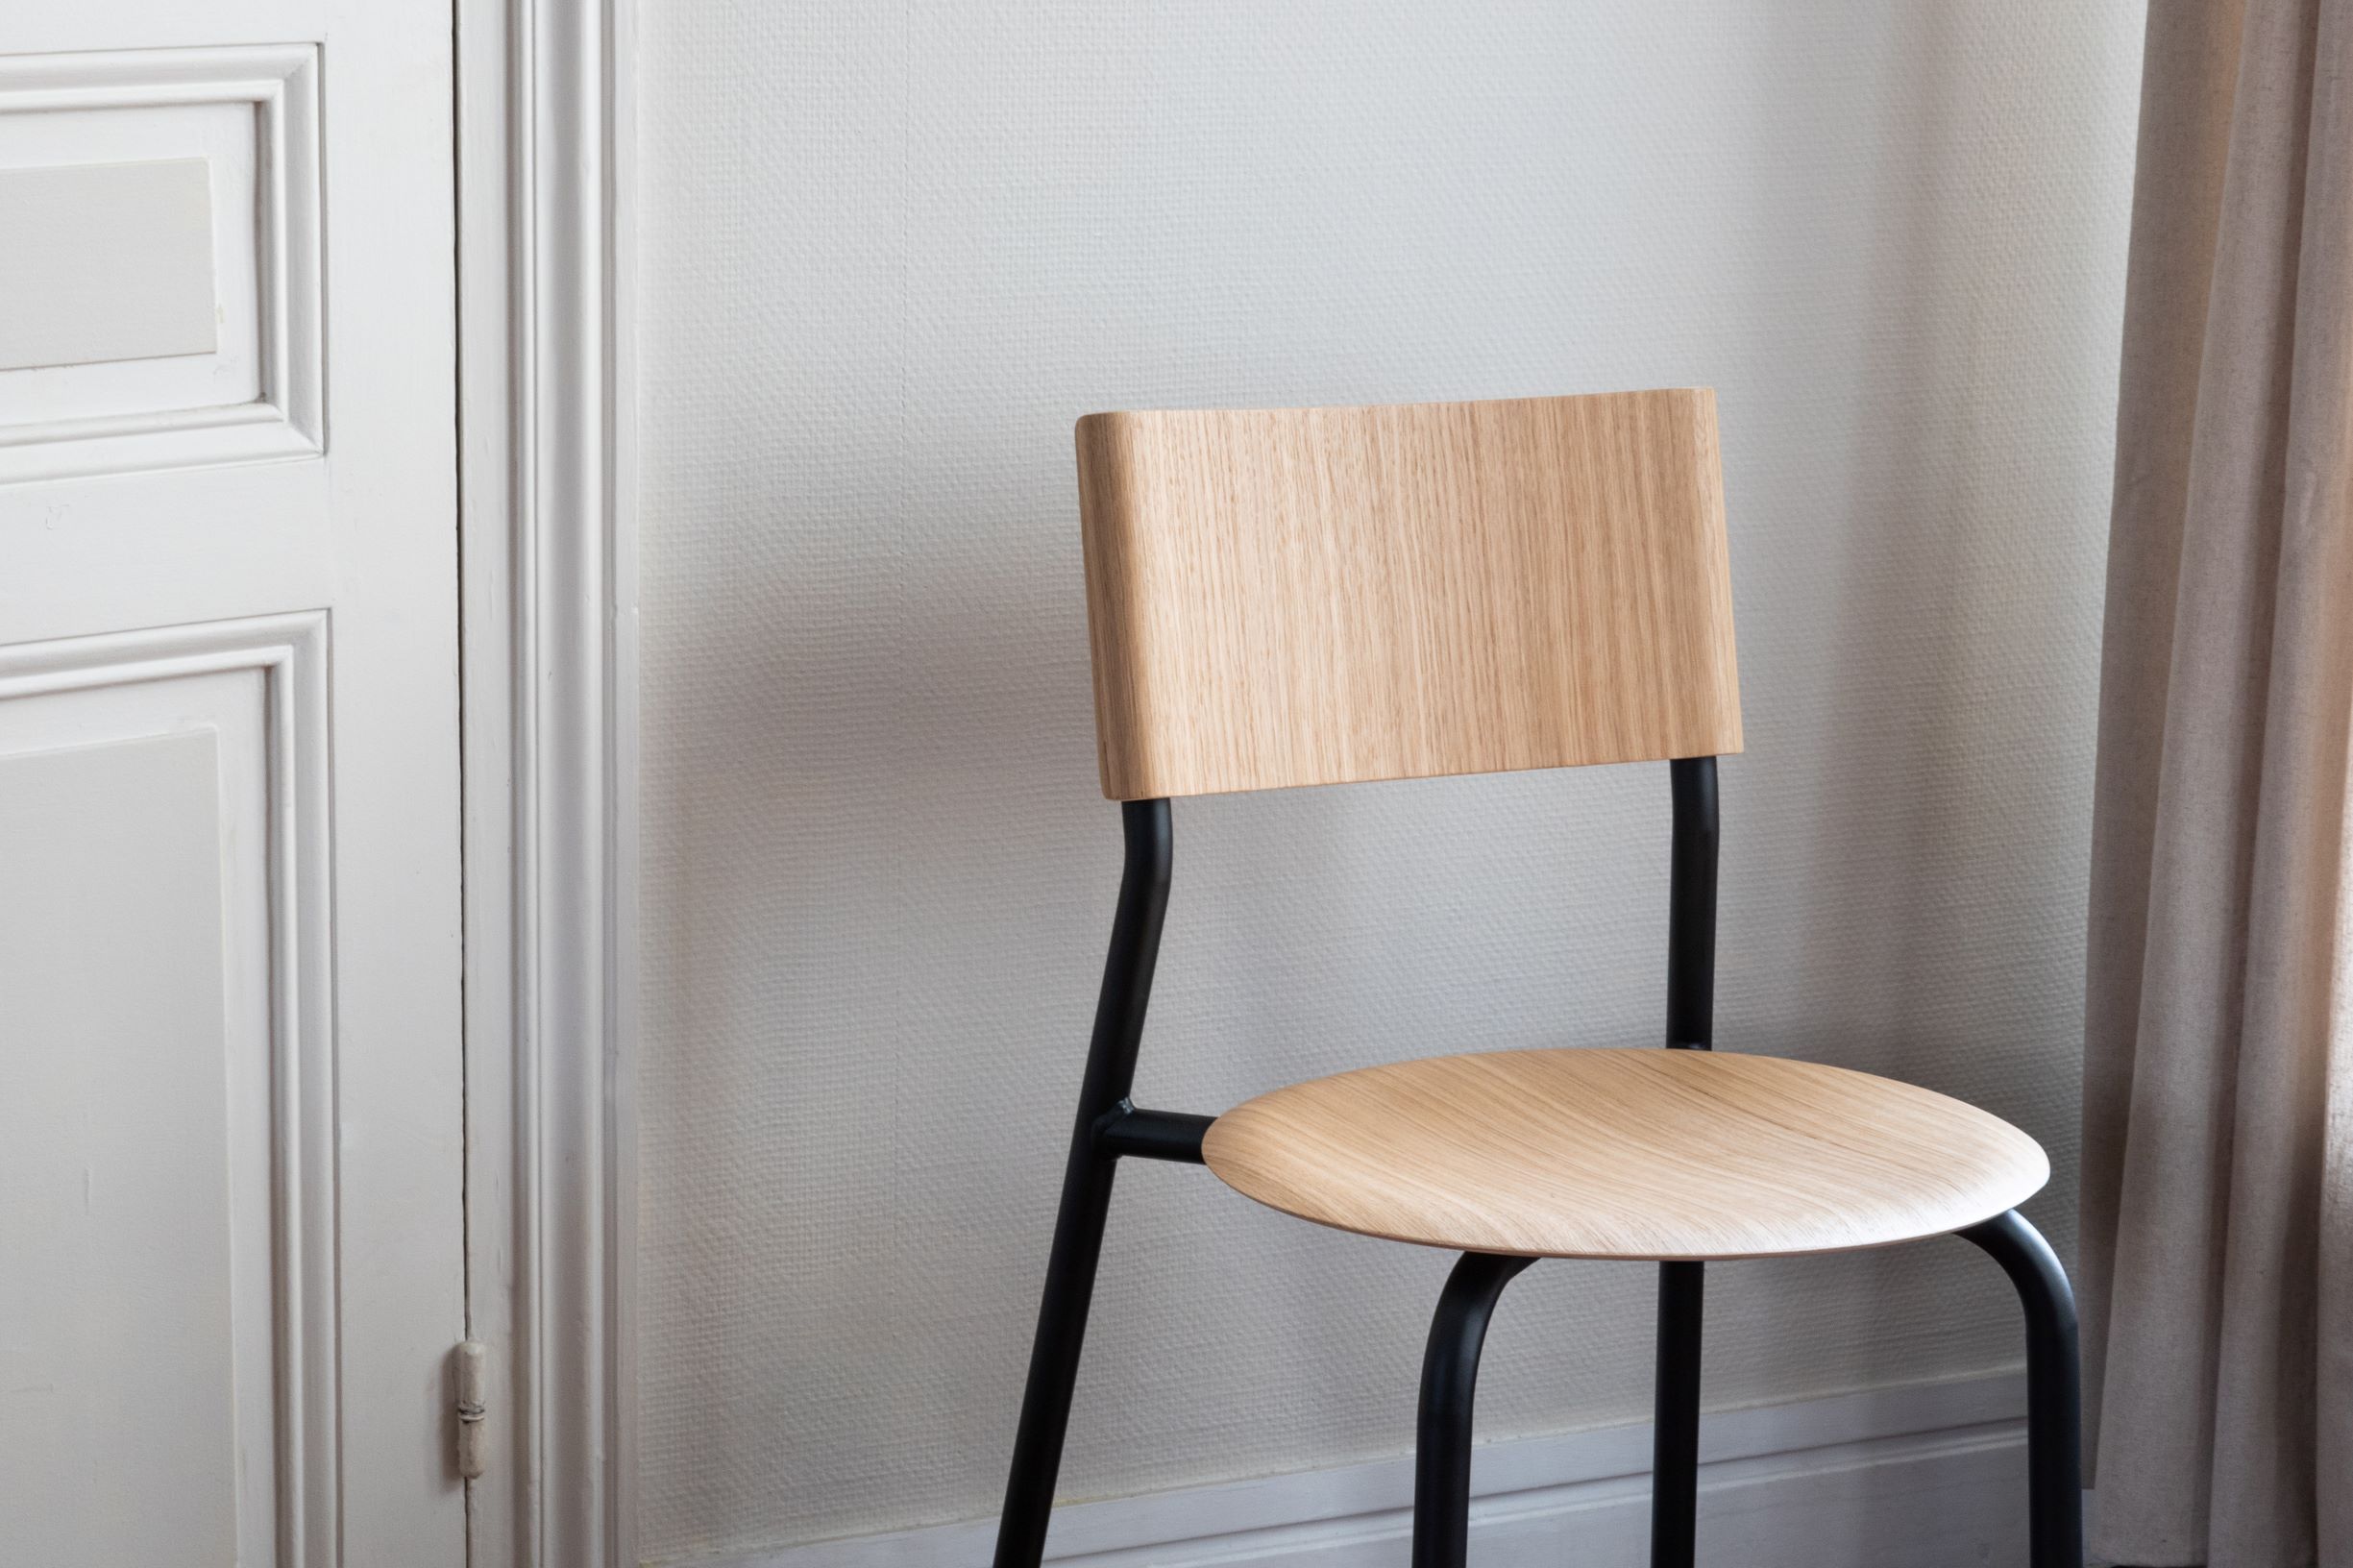 The SSD chair: Simple, Strong and Durable